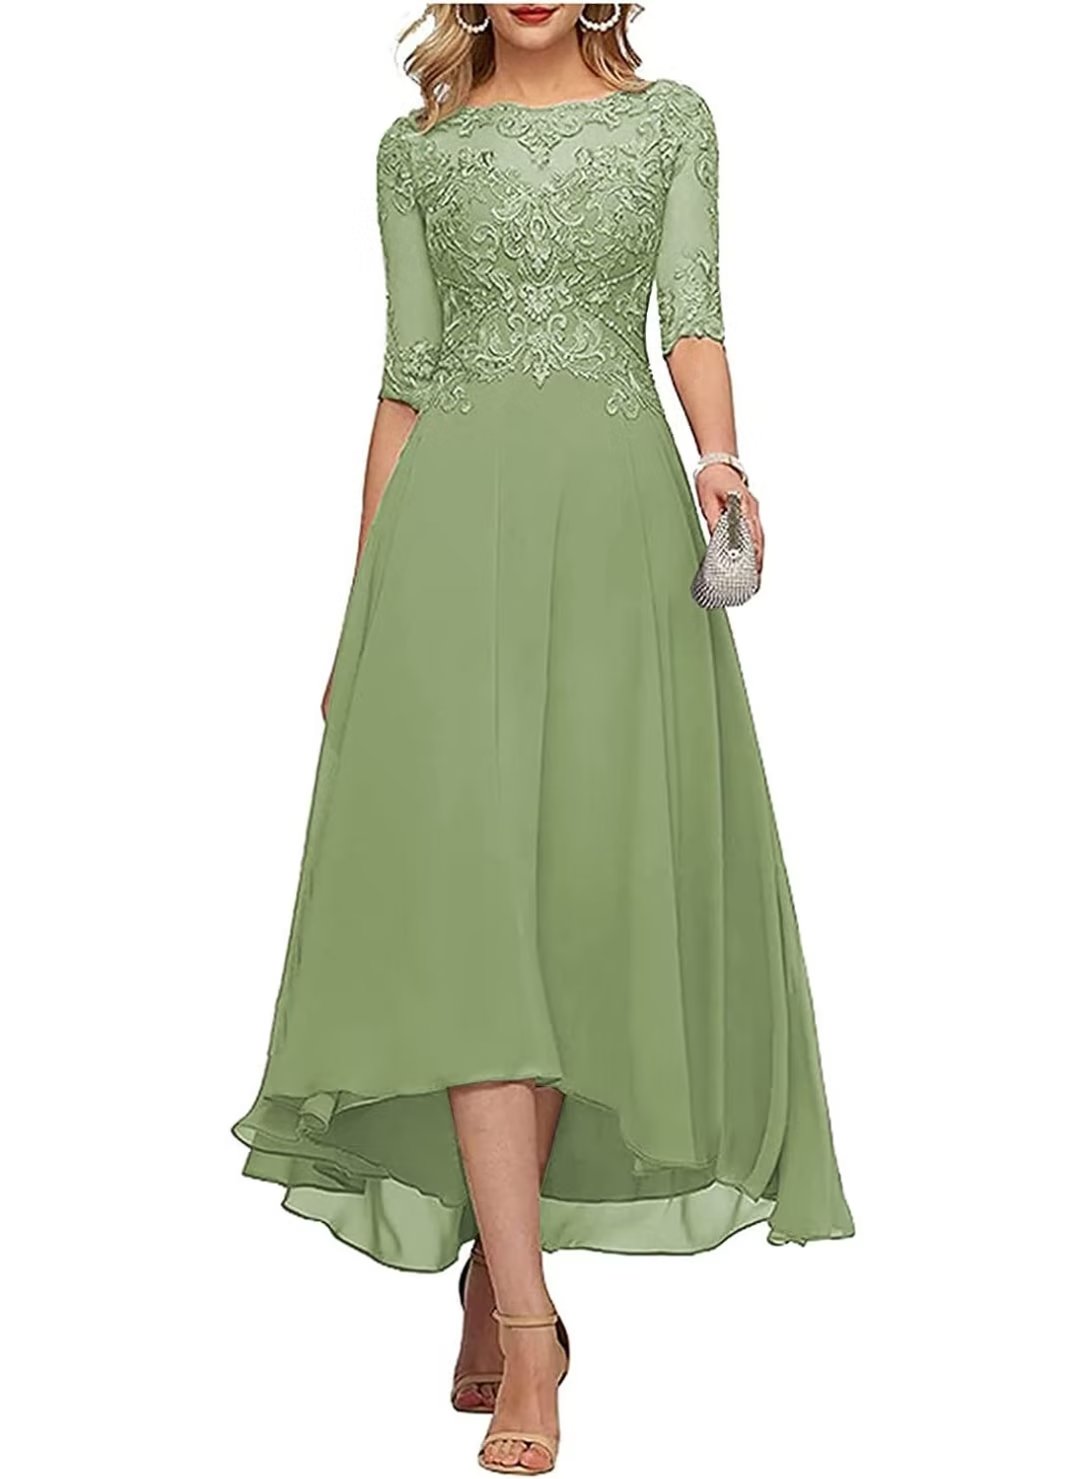 Lace Applique Mother of The Bride Dress Half Sleeves Midi Formal